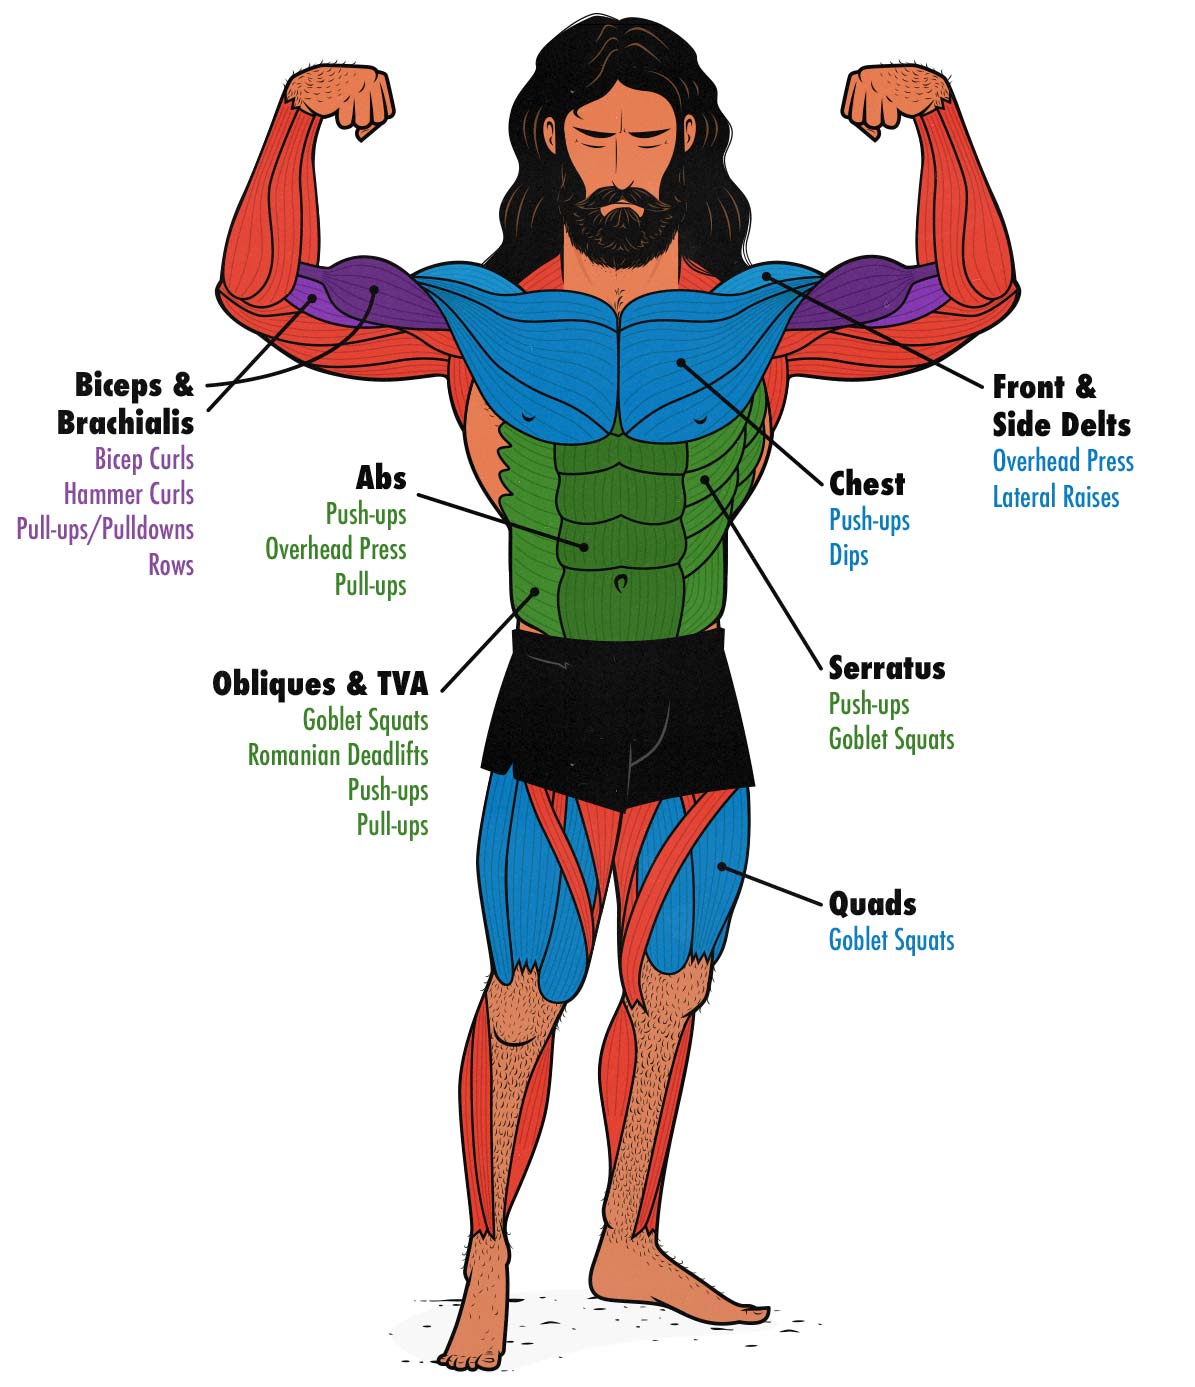 Diagram showing which muscles are worked by which muscle-building exercises.